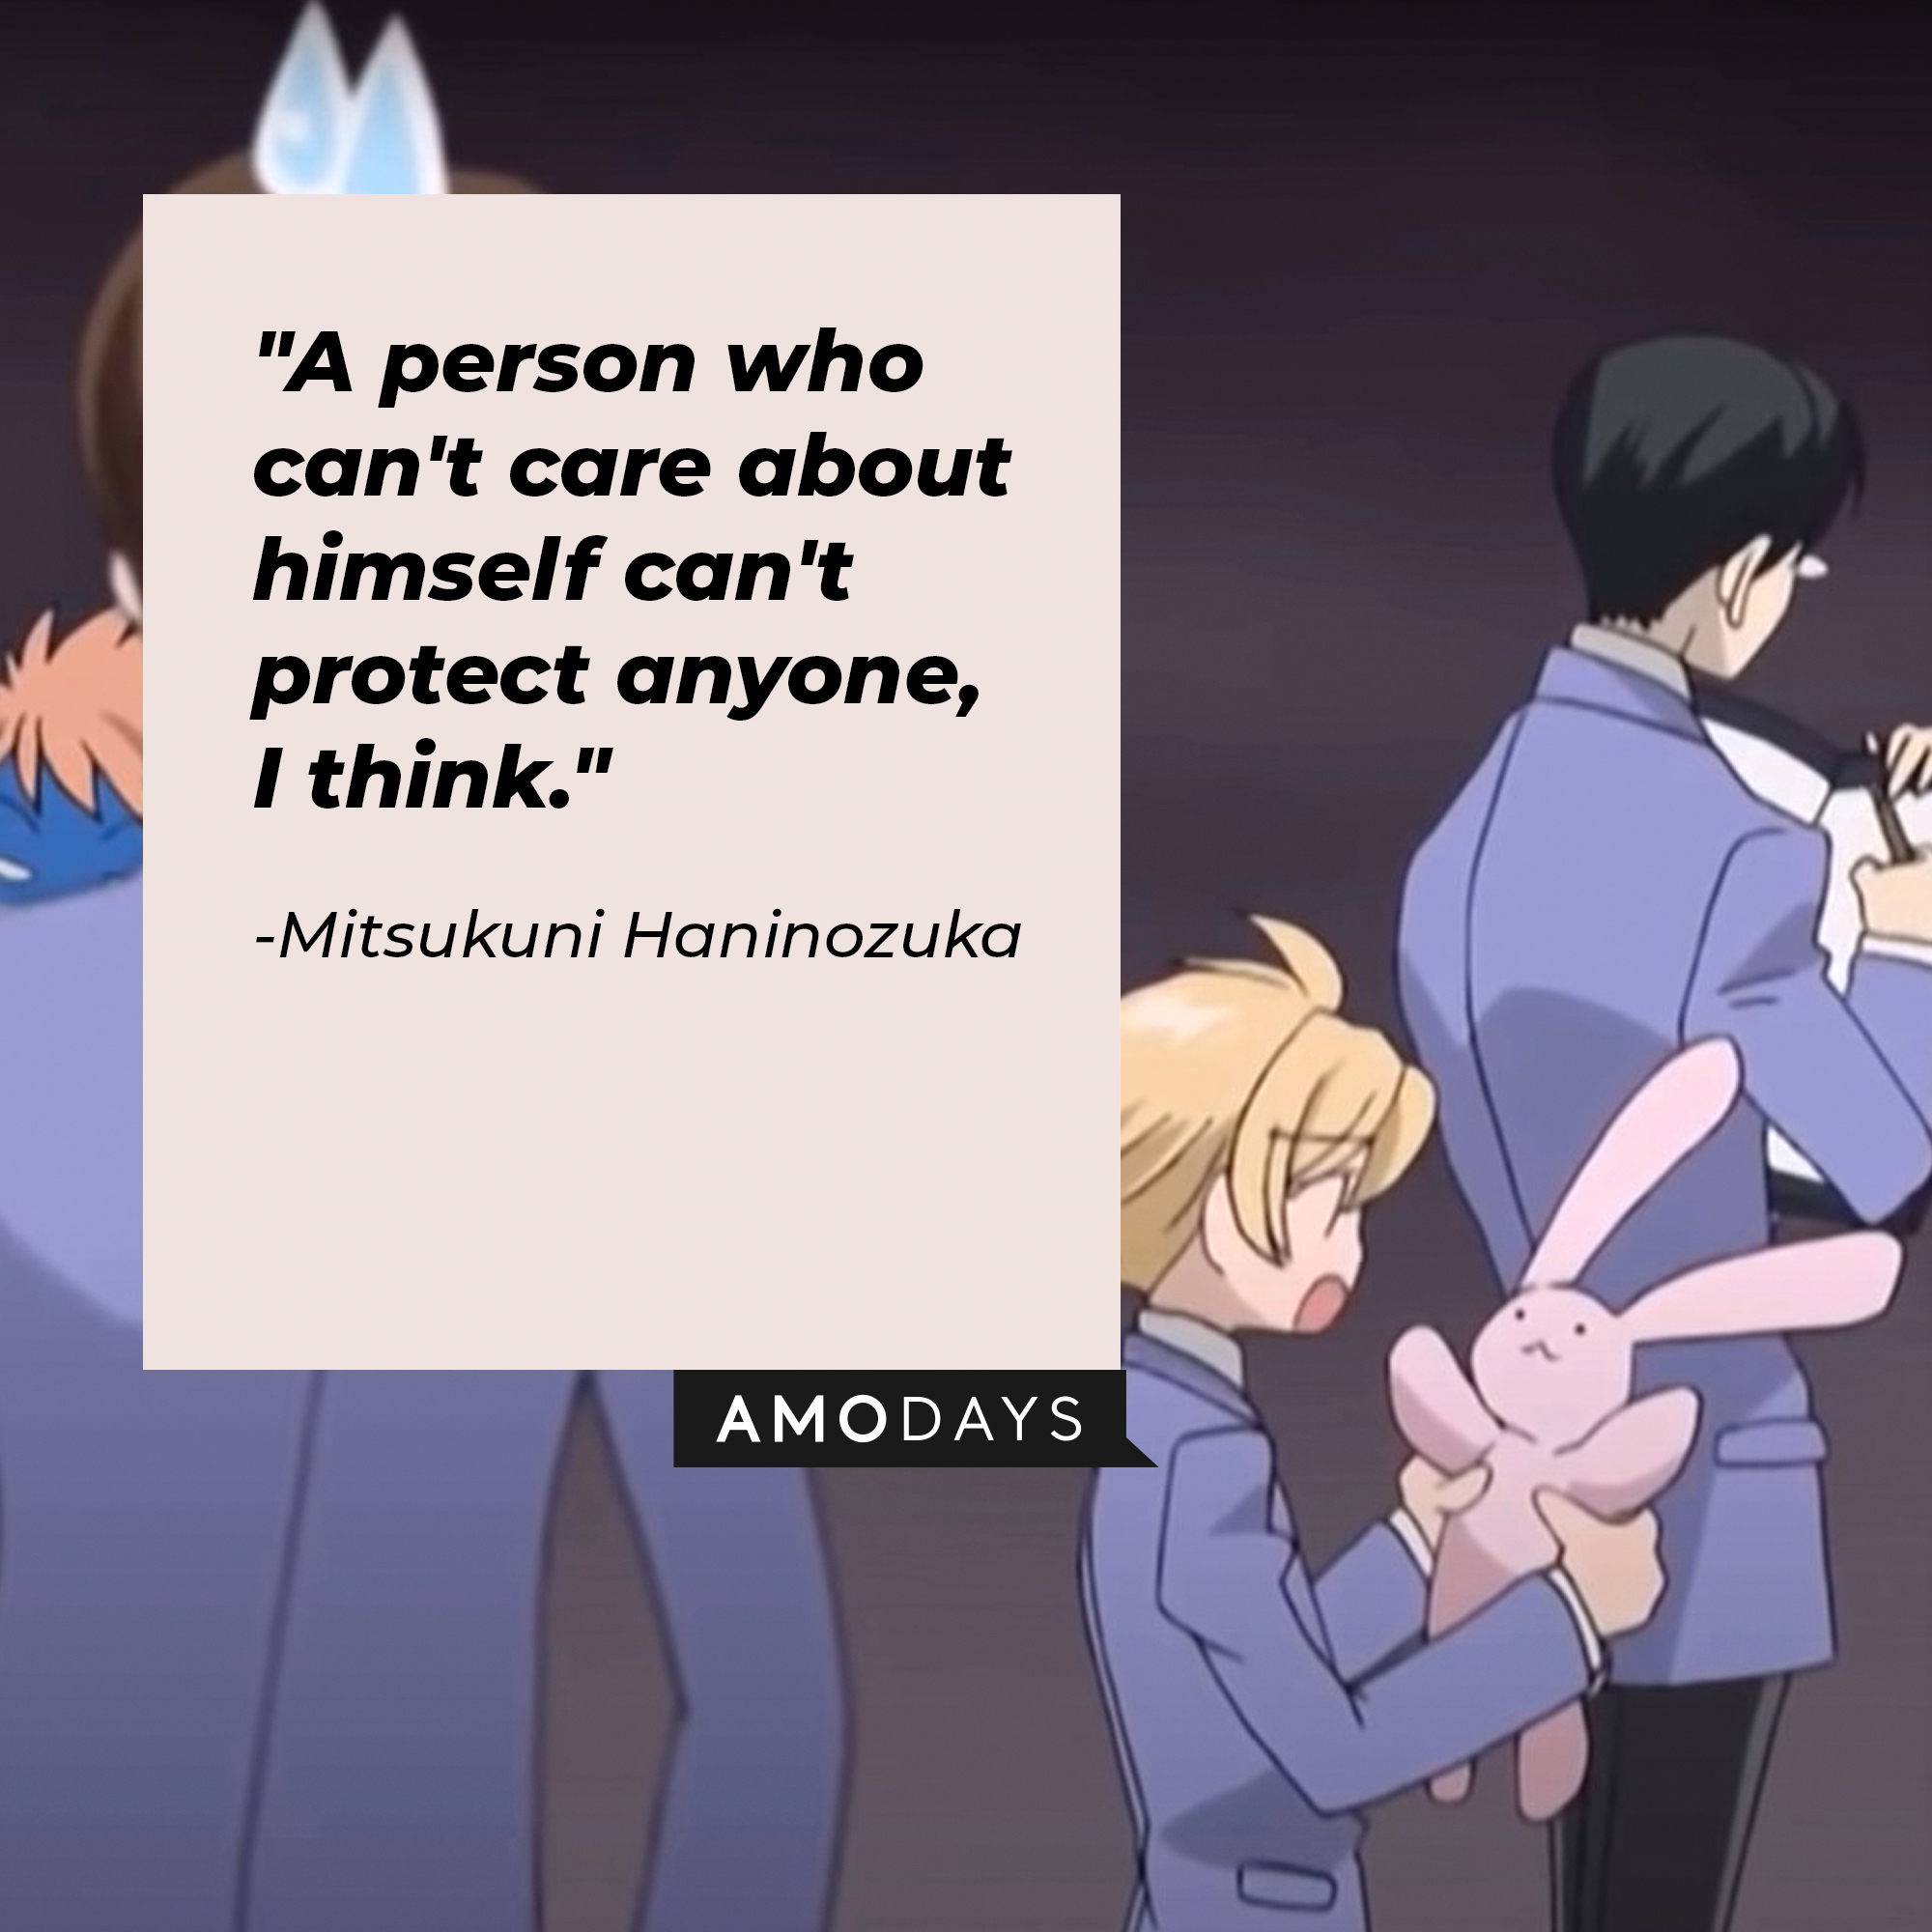 Mitsukuni Haninozuka's quote: "A person who can't care about himself can't protect anyone, I think." | Source: Facebook.com/theouranhostclub